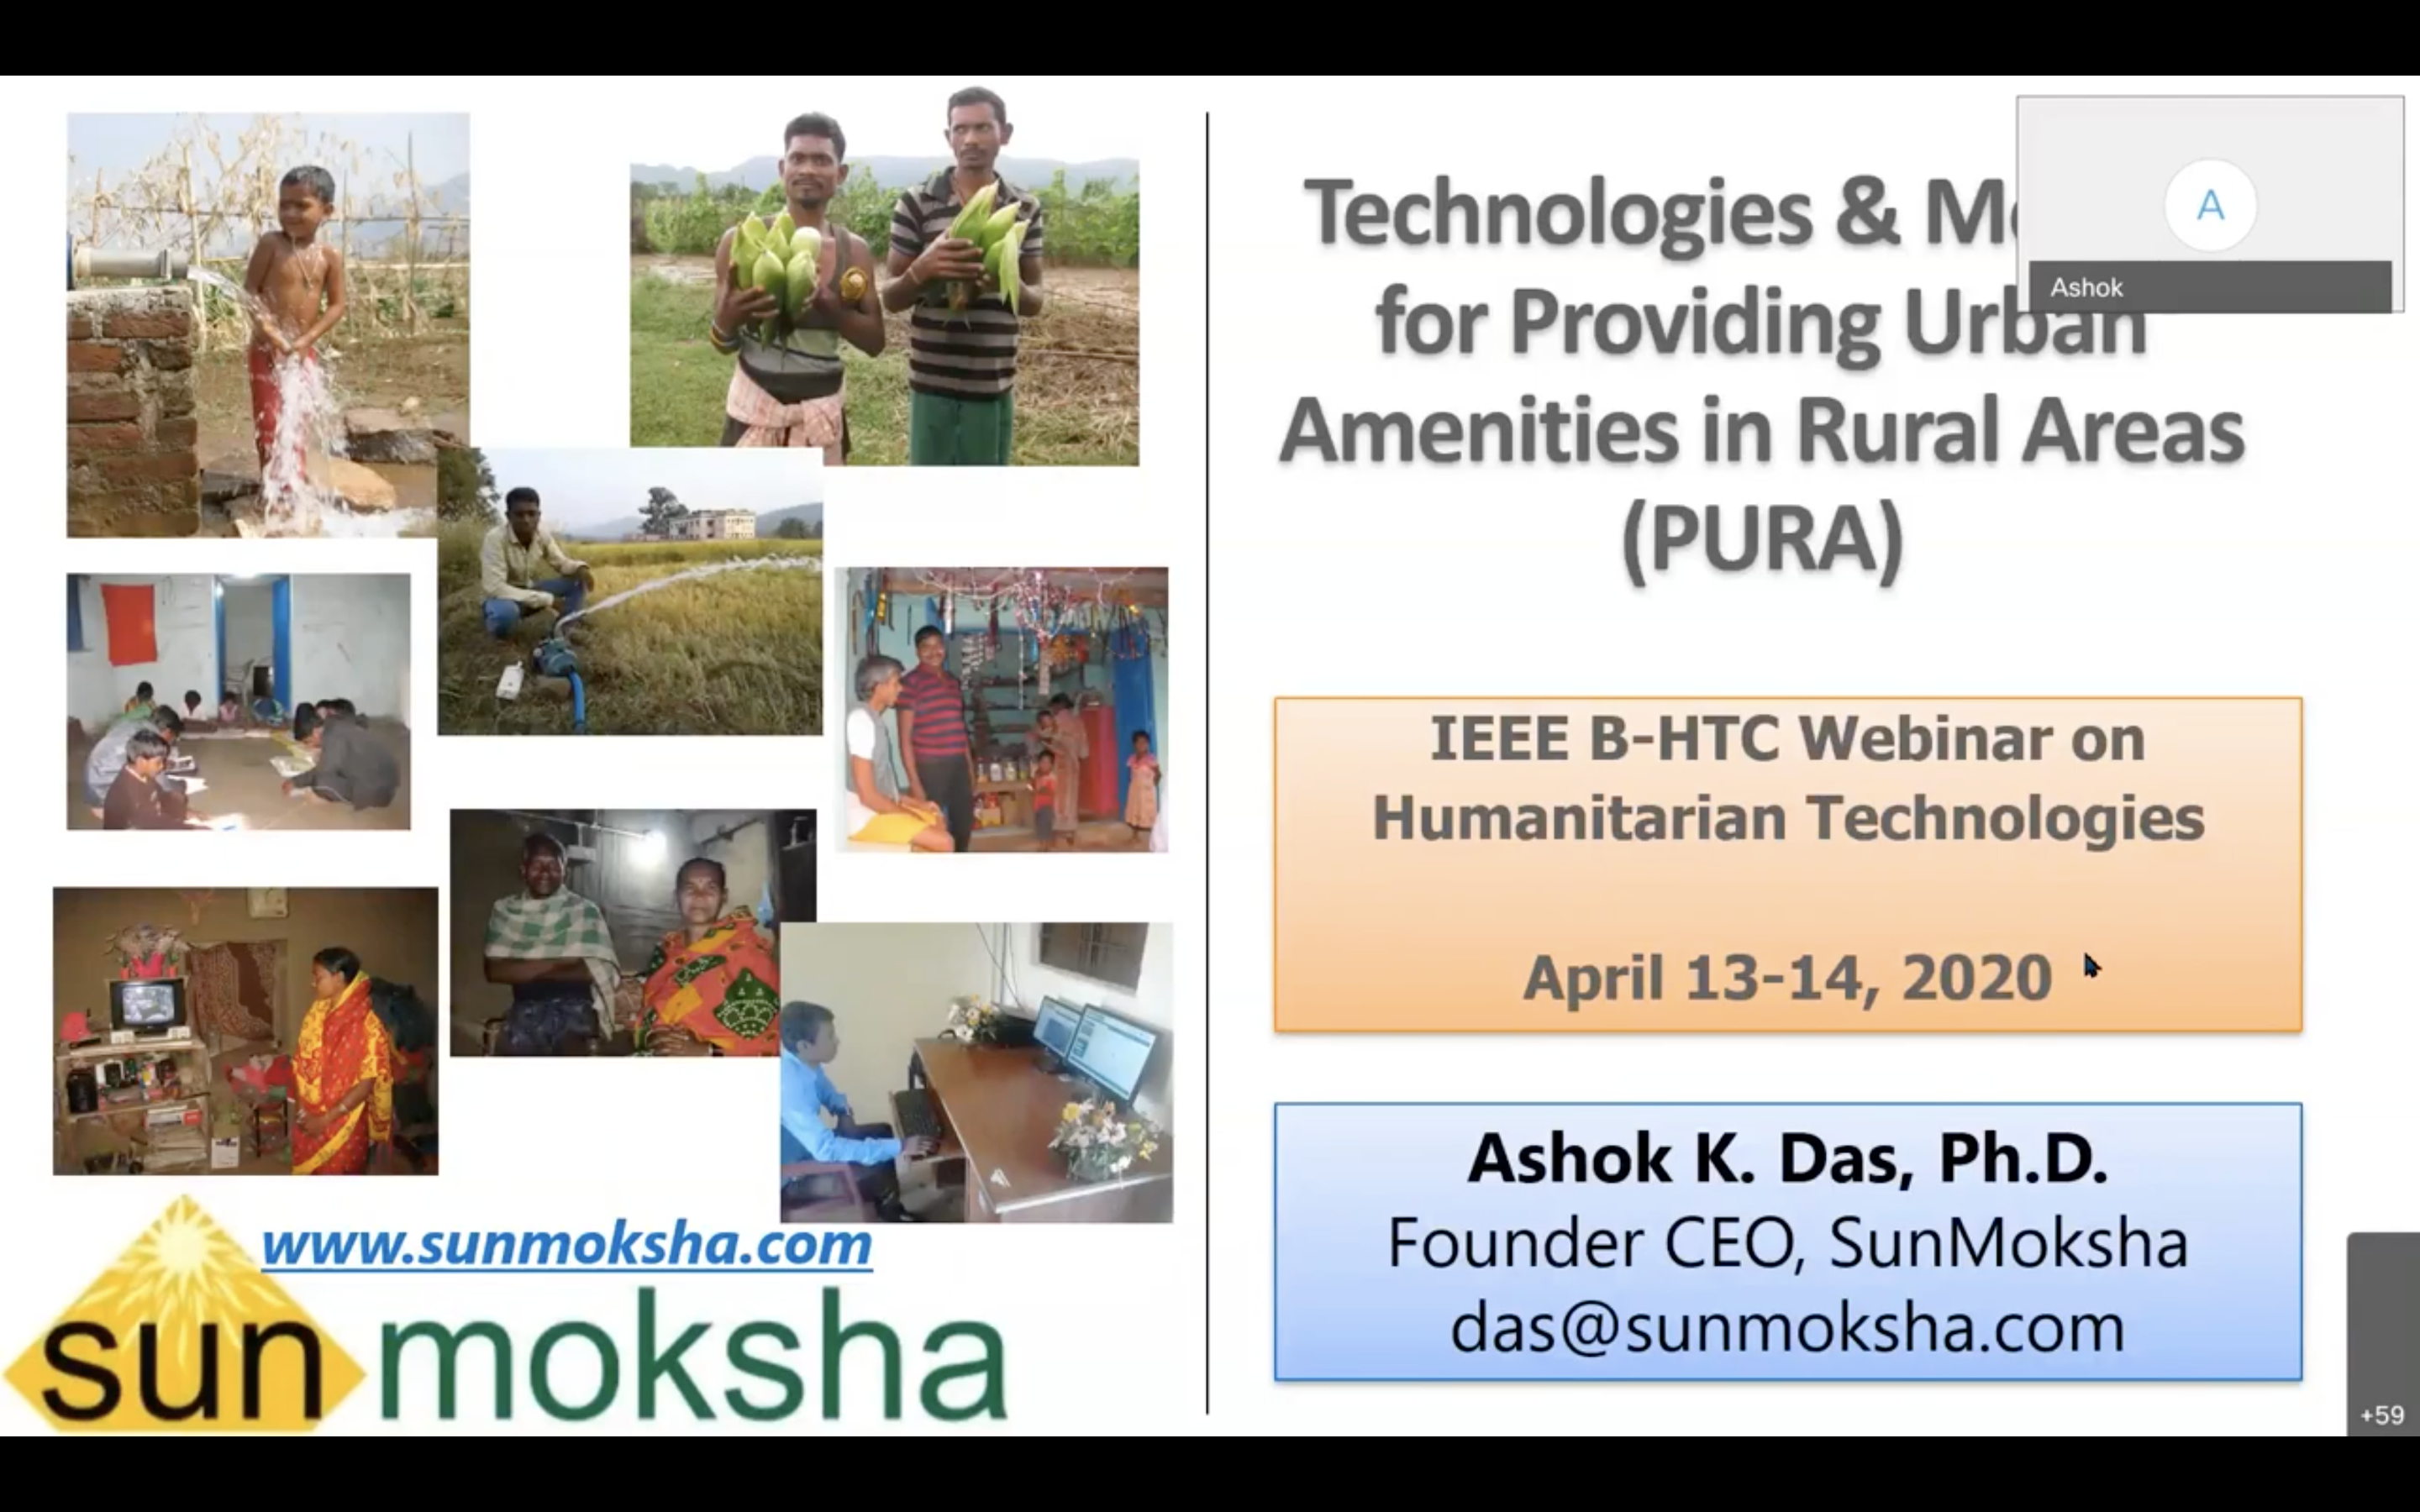 Technologies & Models for Providing Urban Amenities in Rural Areas